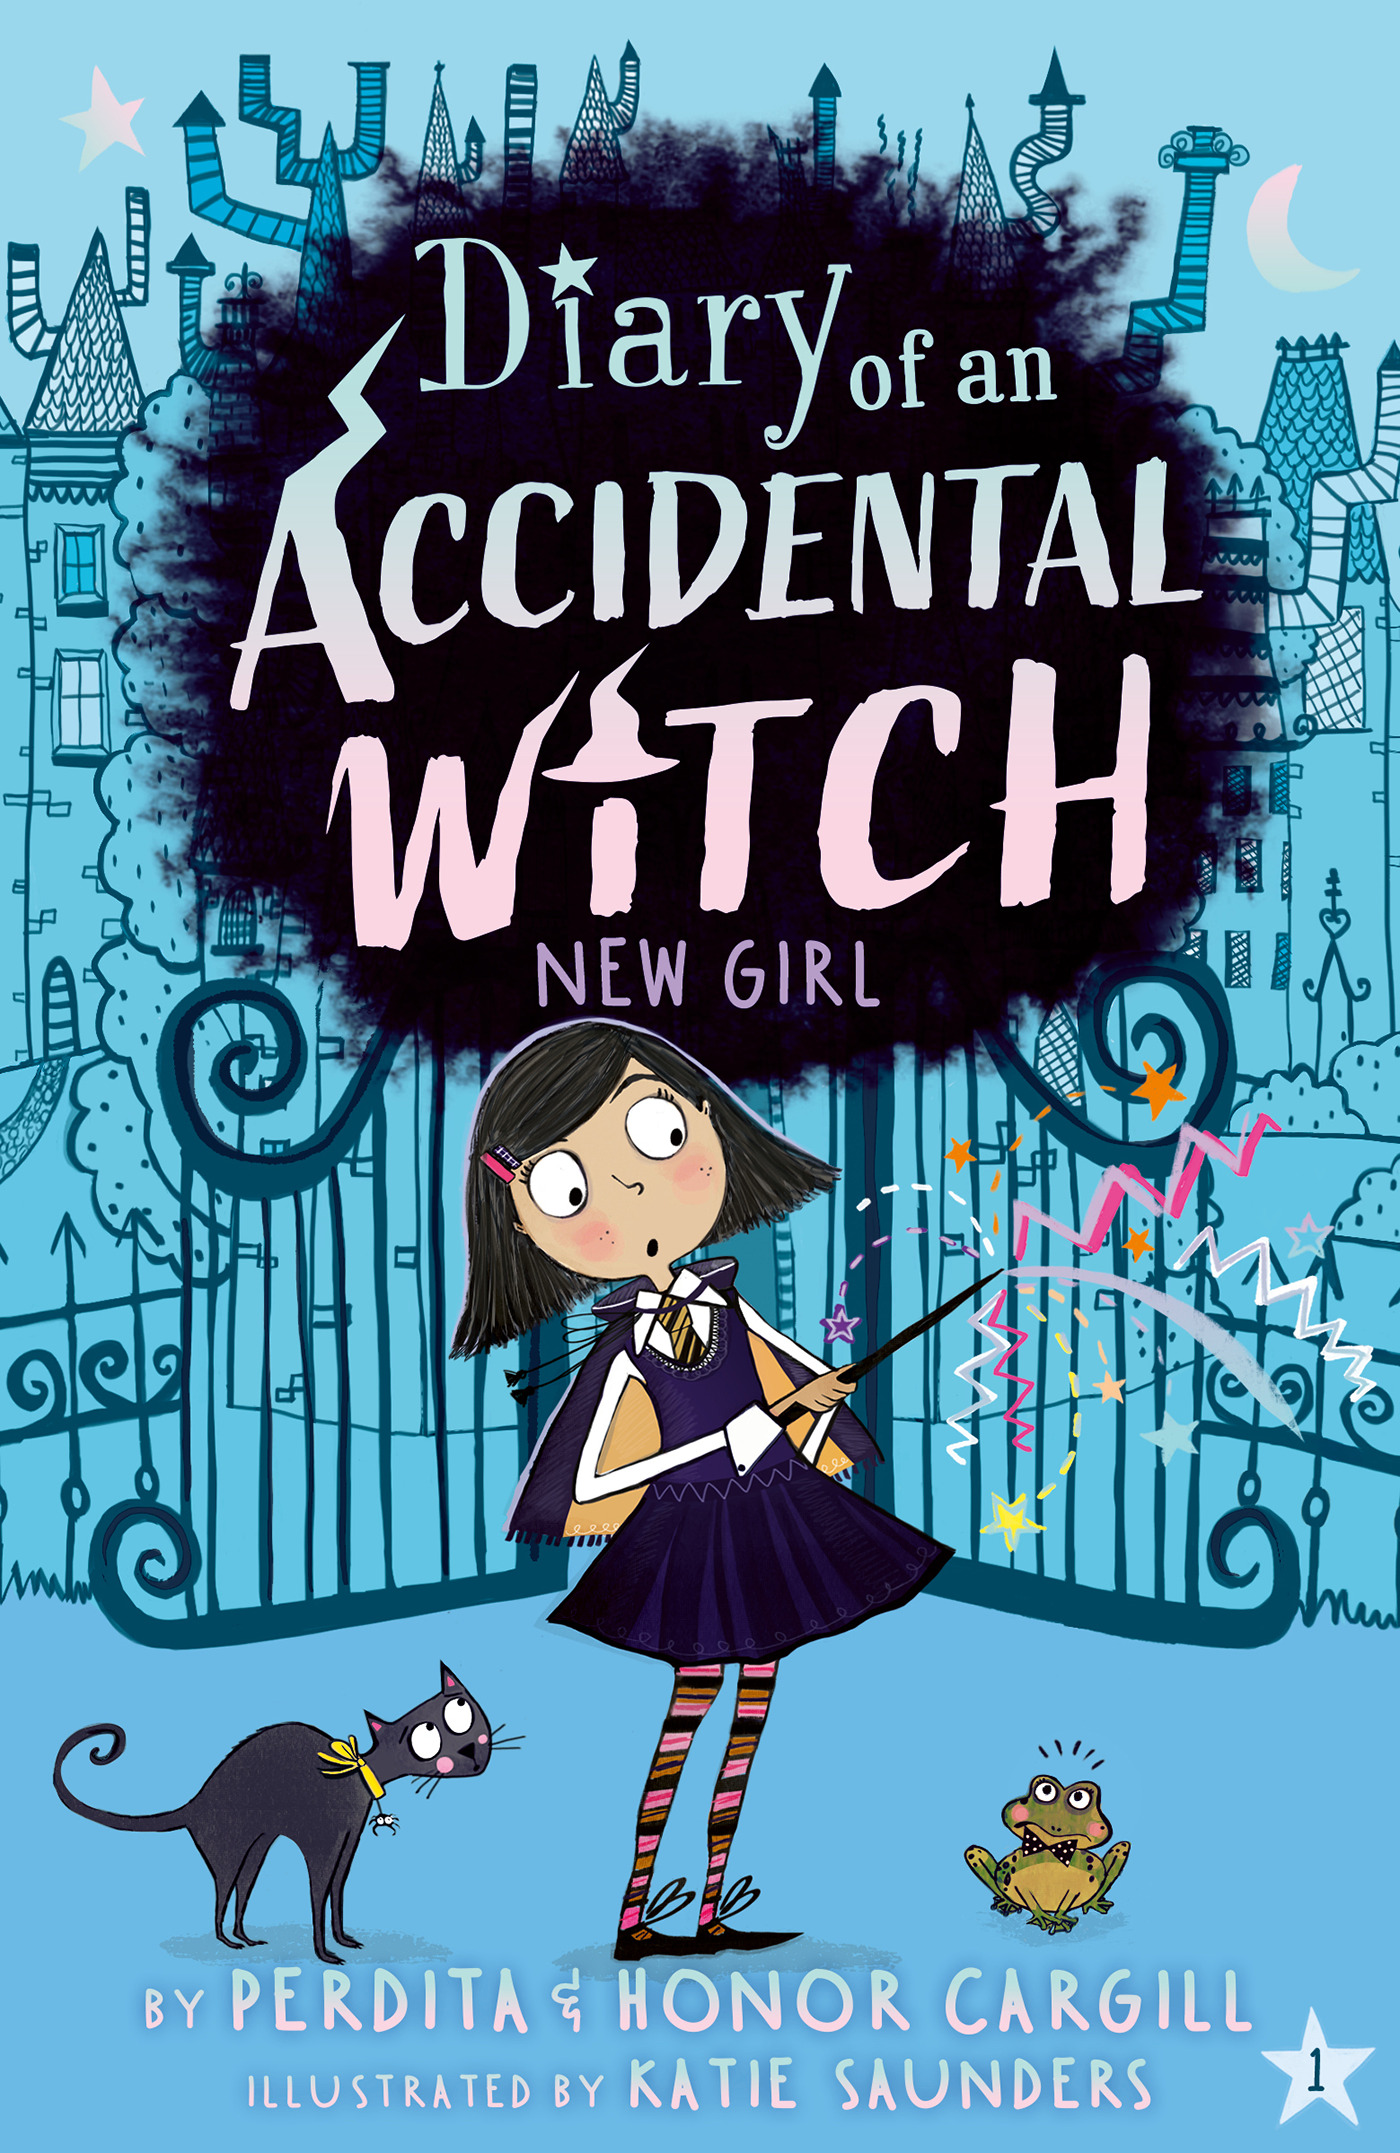 Diary of an Accidental Witch Vol. 1 - New Girl | Cargill, Perdita